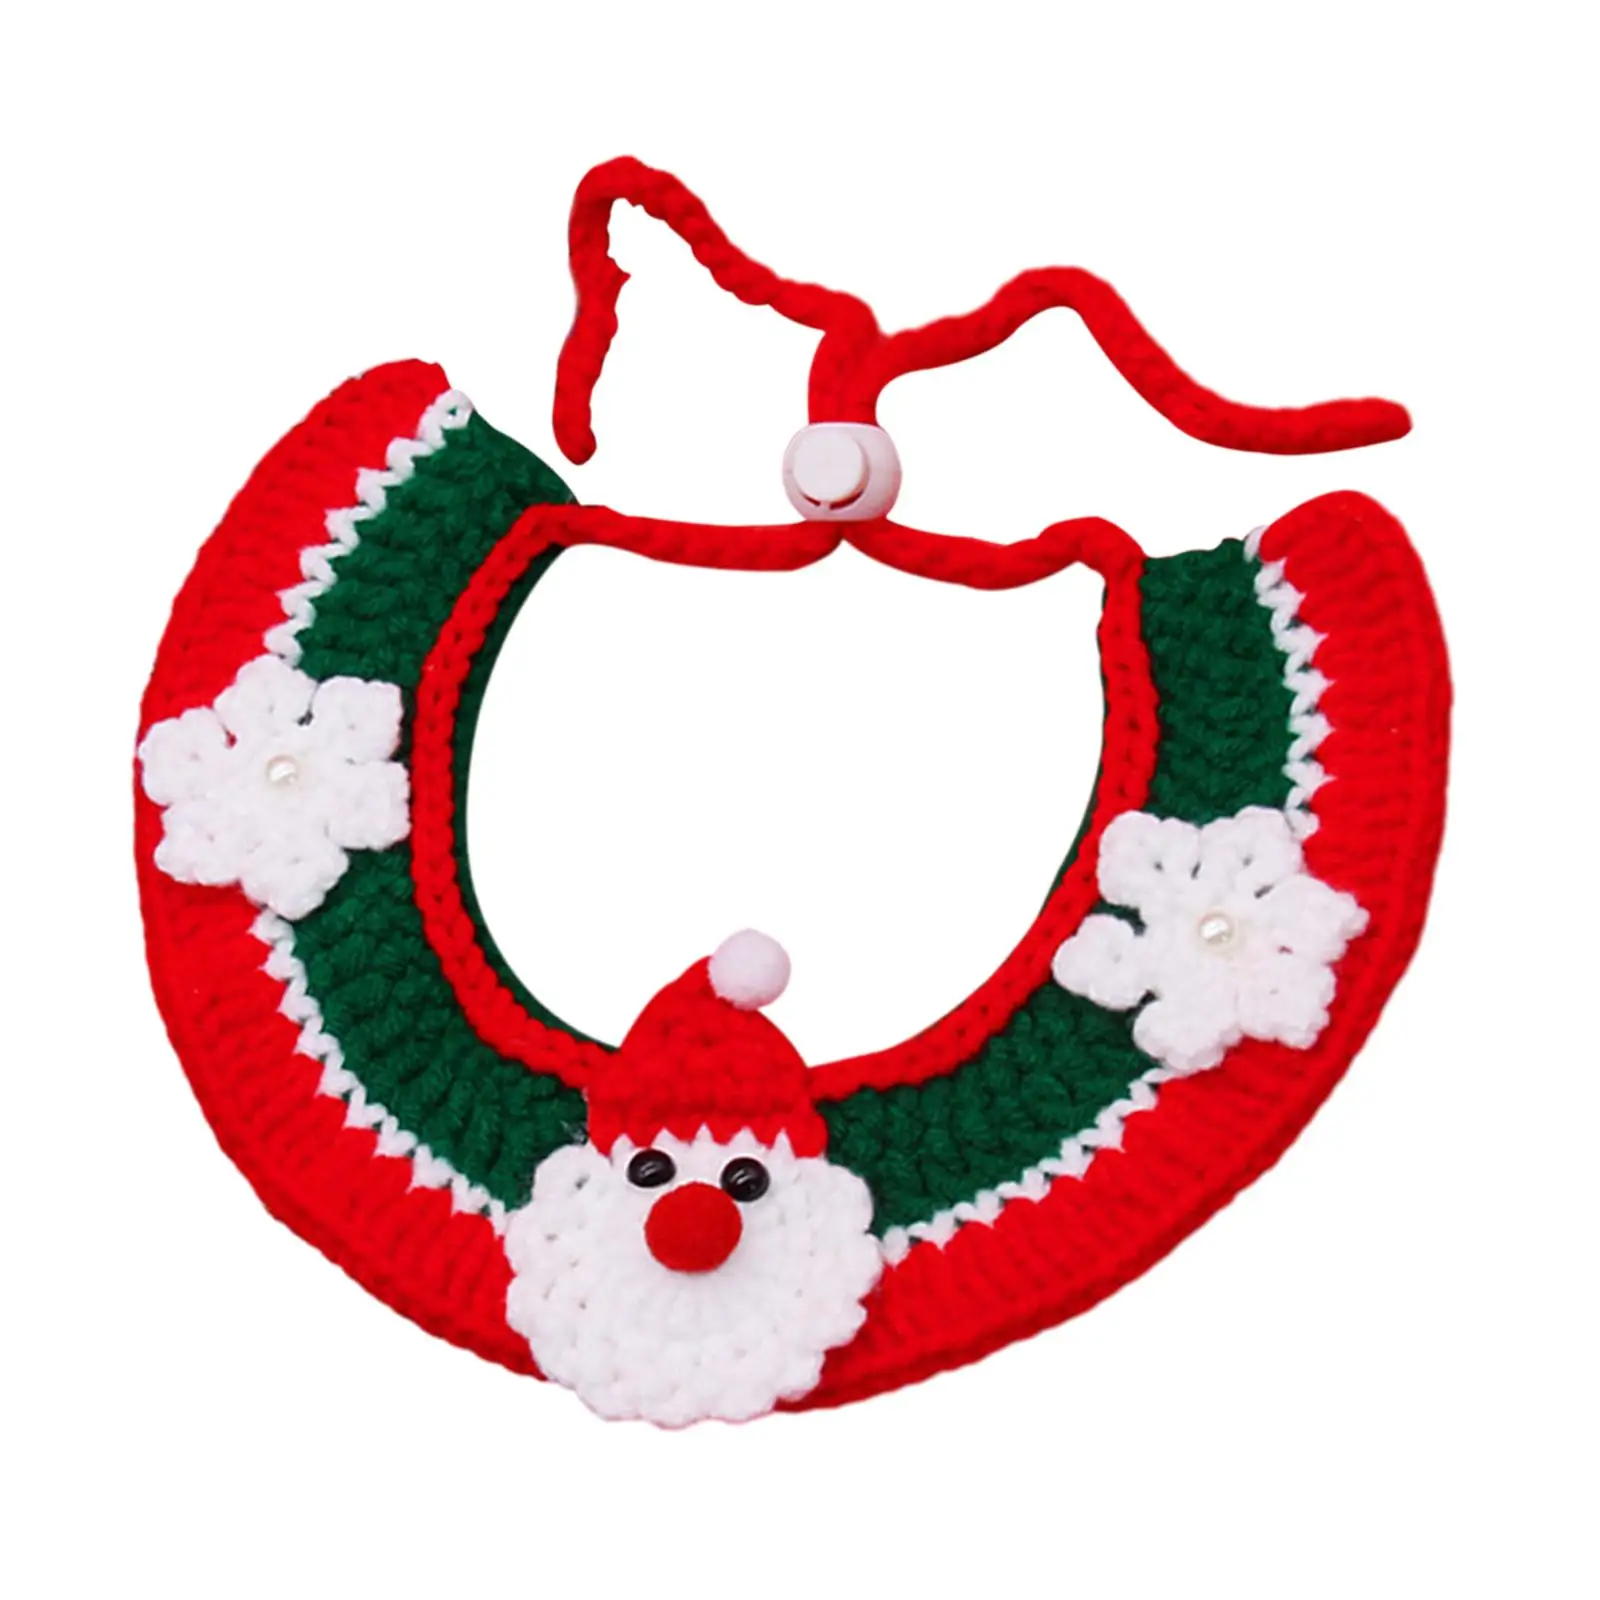 Knitting Cat Collar Holiday Santa Claus for Cat and Dog Xmas Dress up Neckwear Hand Woven Scarf Kitten Necklace Accessories